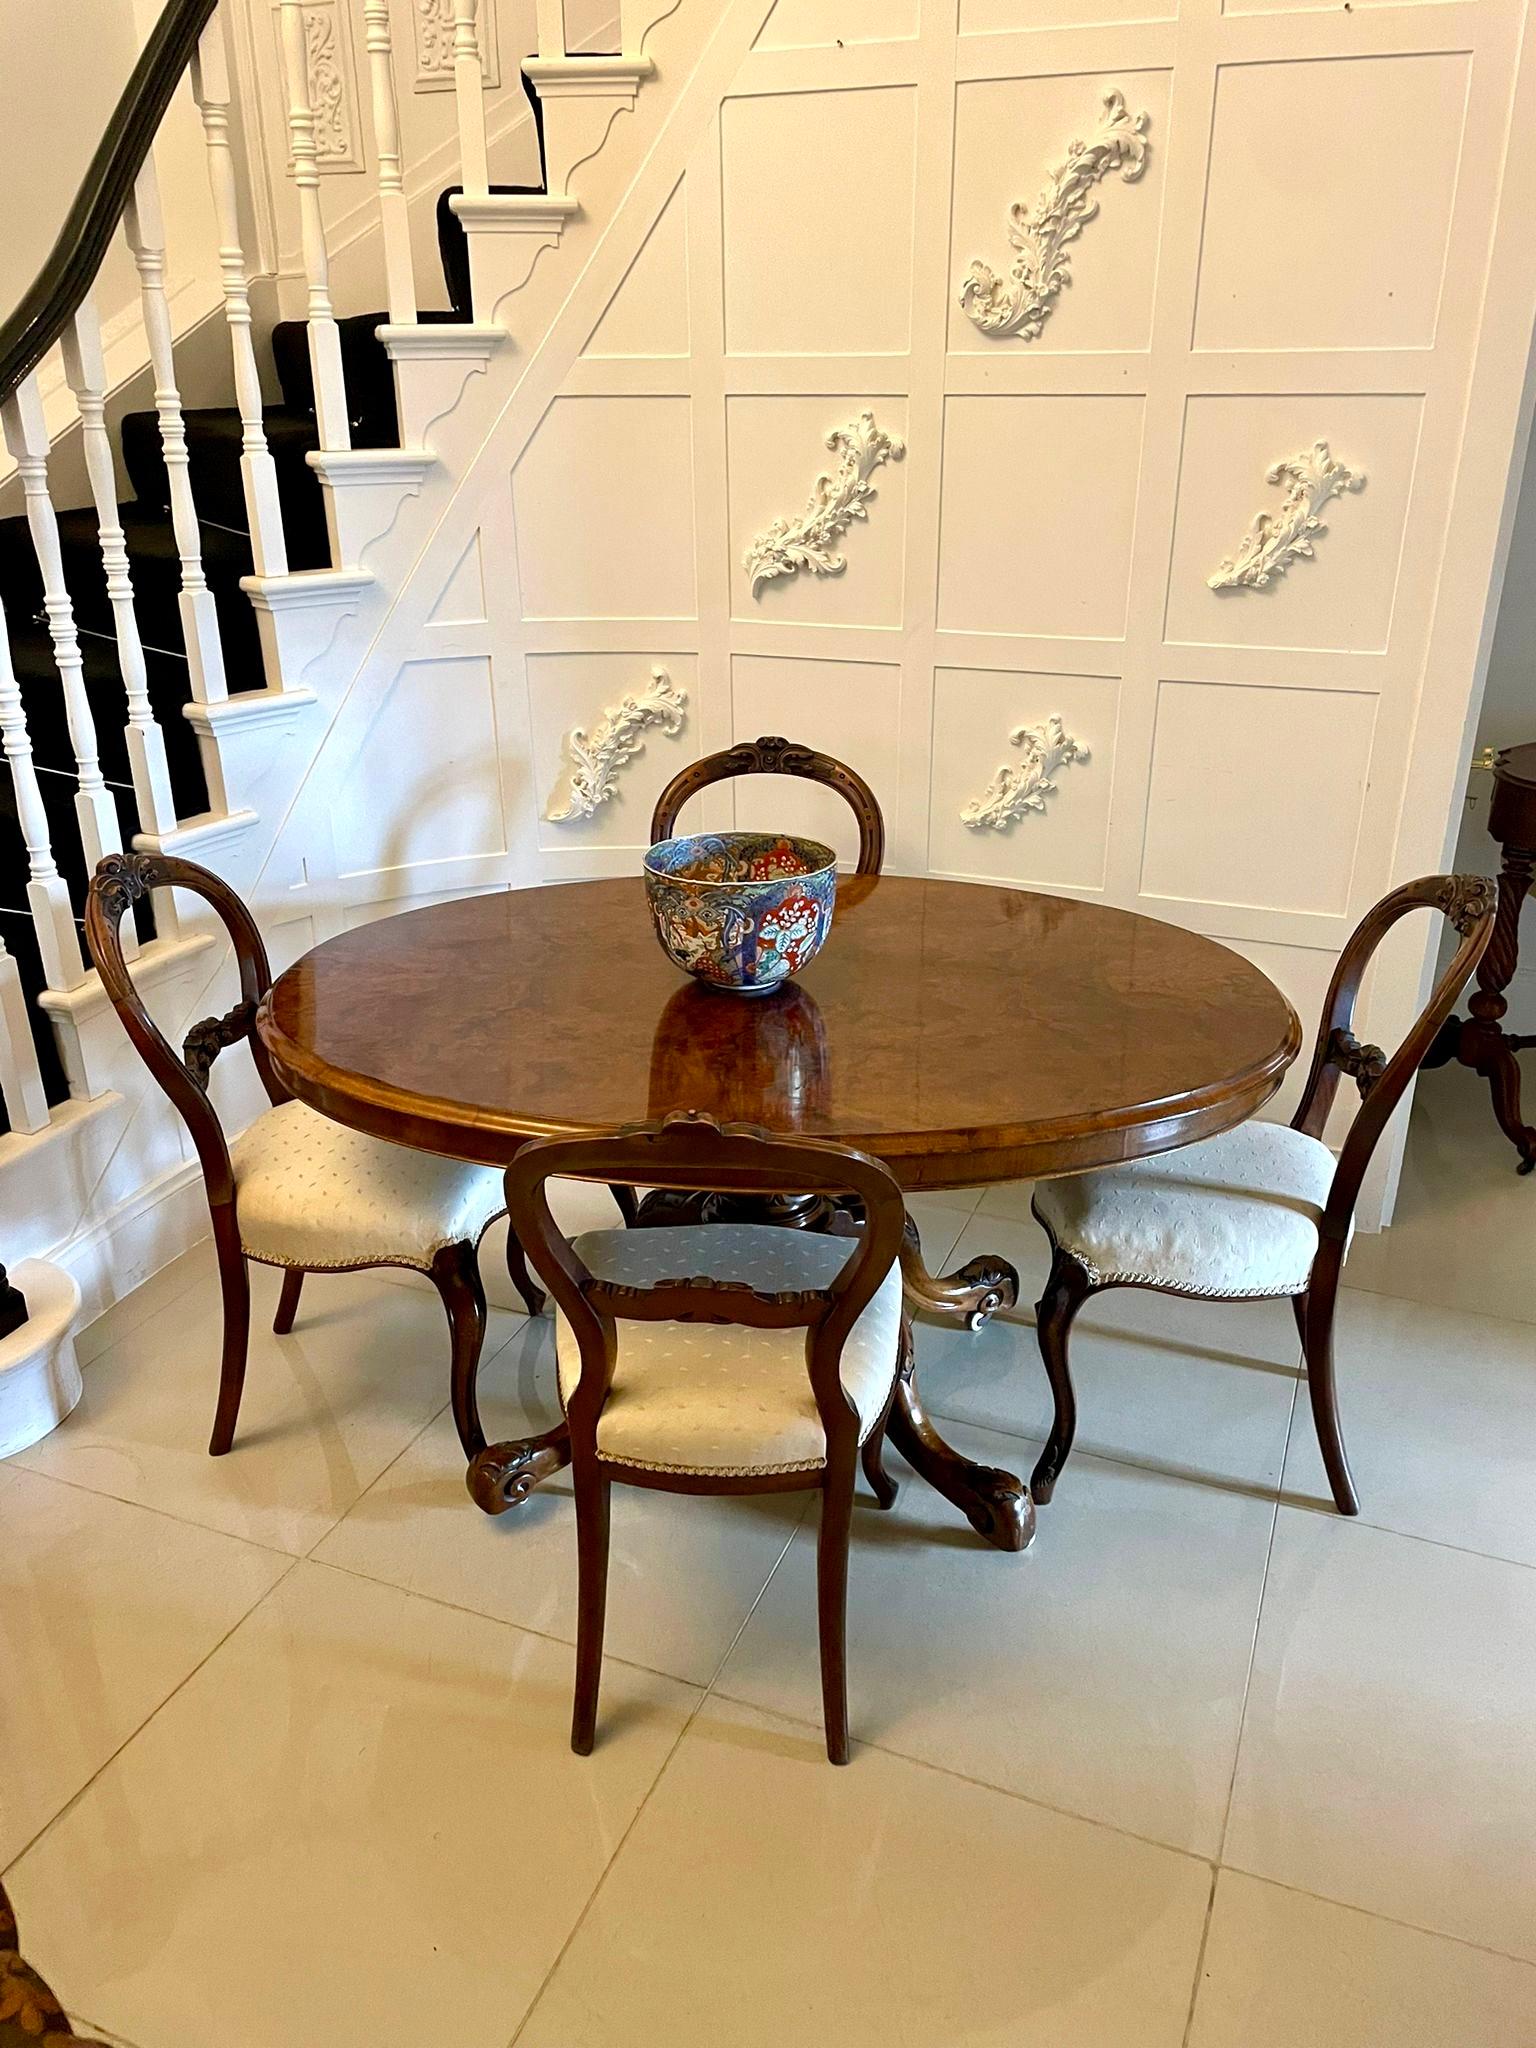 Outstanding quality antique Victorian oval burr walnut dining table having an outstanding oval burr walnut top with a thumb moulded edge supported by a turned carved solid walnut pedestal column standing on four shaped carved cabriole legs with